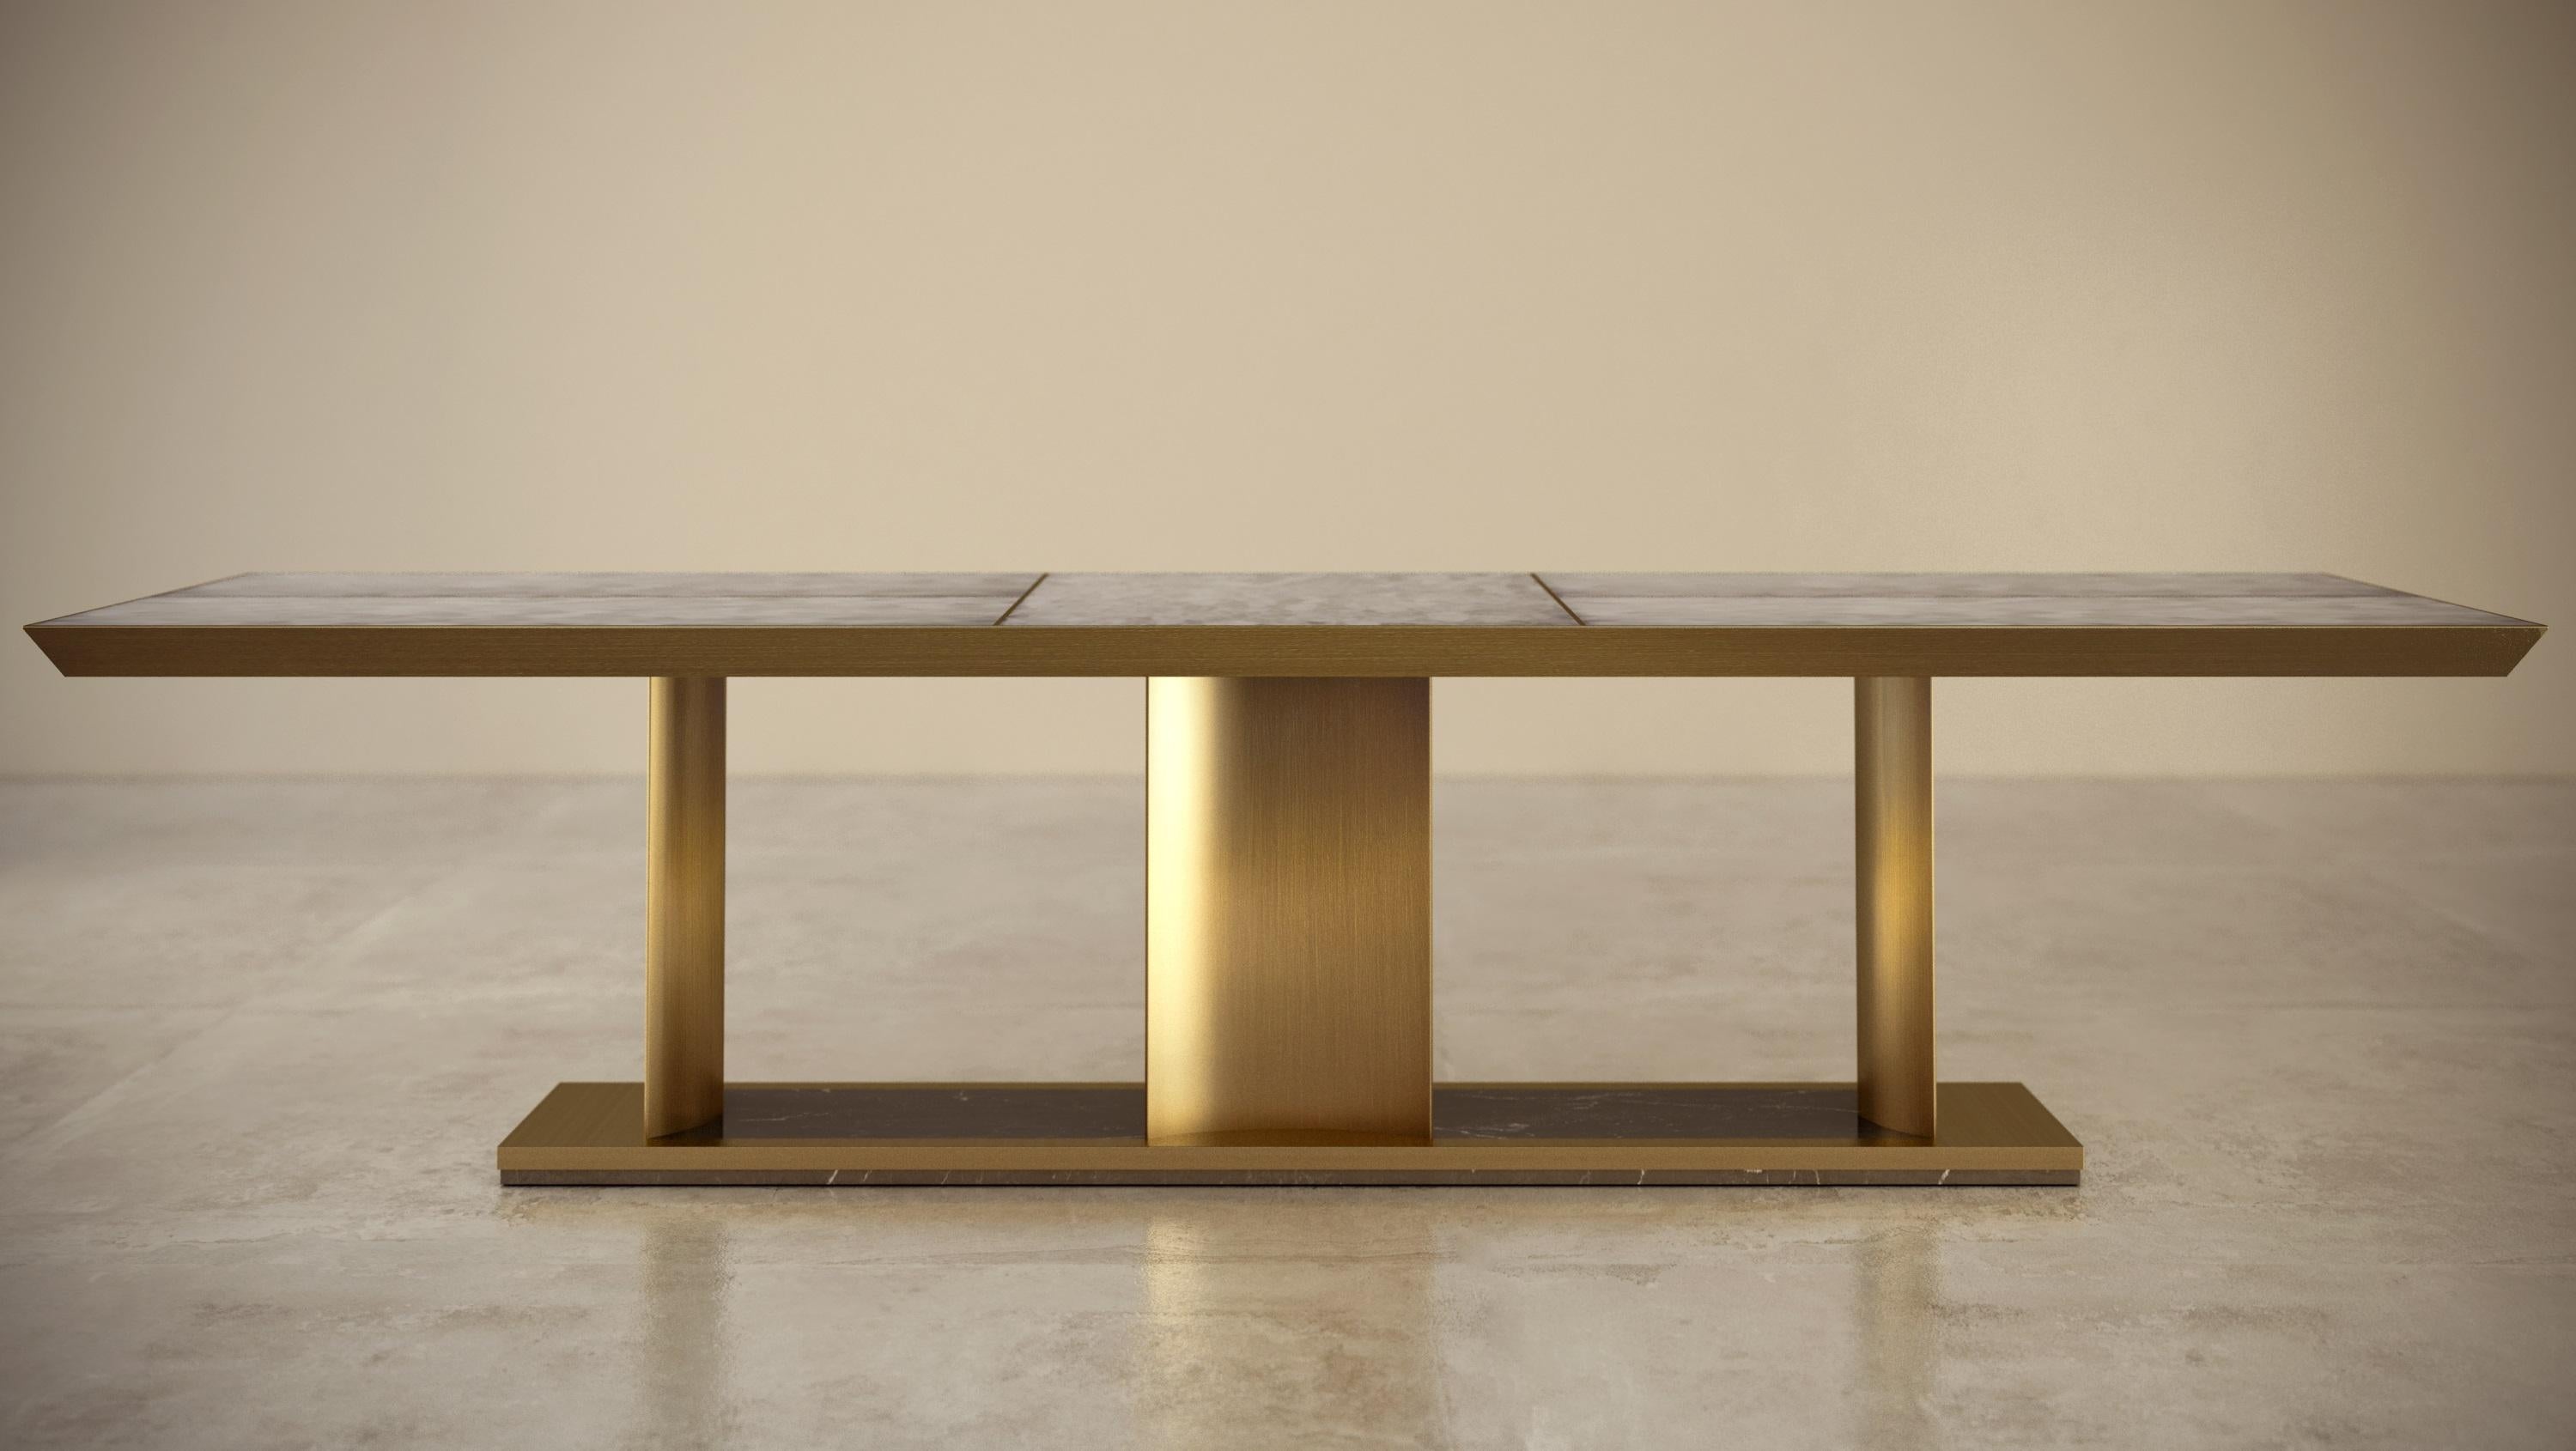 Dining table composed in marble and metal brass finishing, created by Michele Arcarese Architect together with Giovannozzi.
- Top with beveled edge in flush marble type 